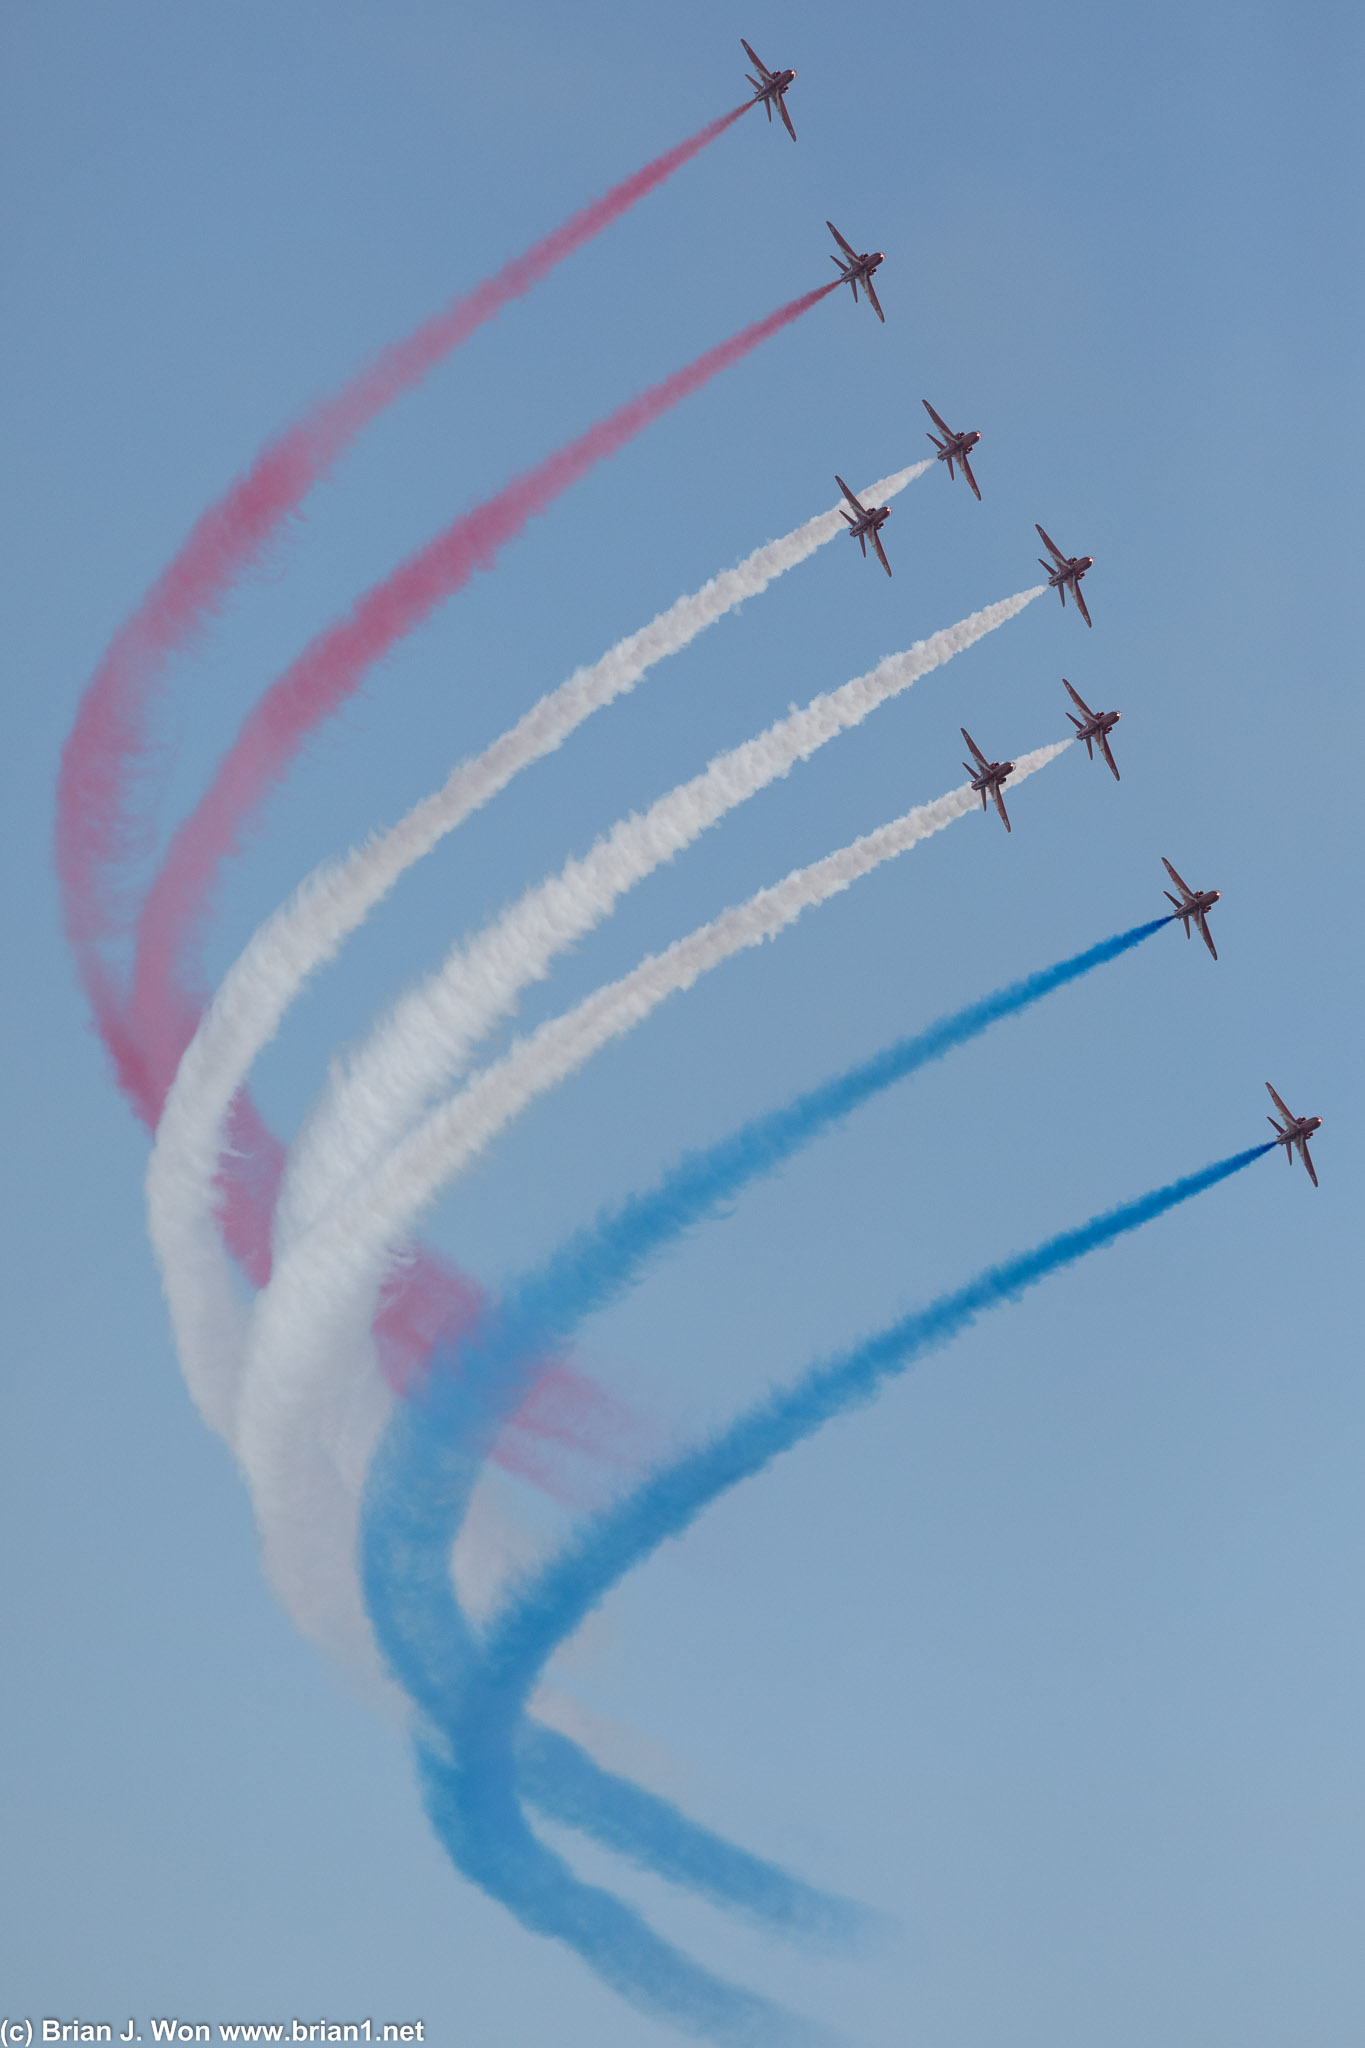 Swooping formation of red, white and blue by the RAF Red Arrows.